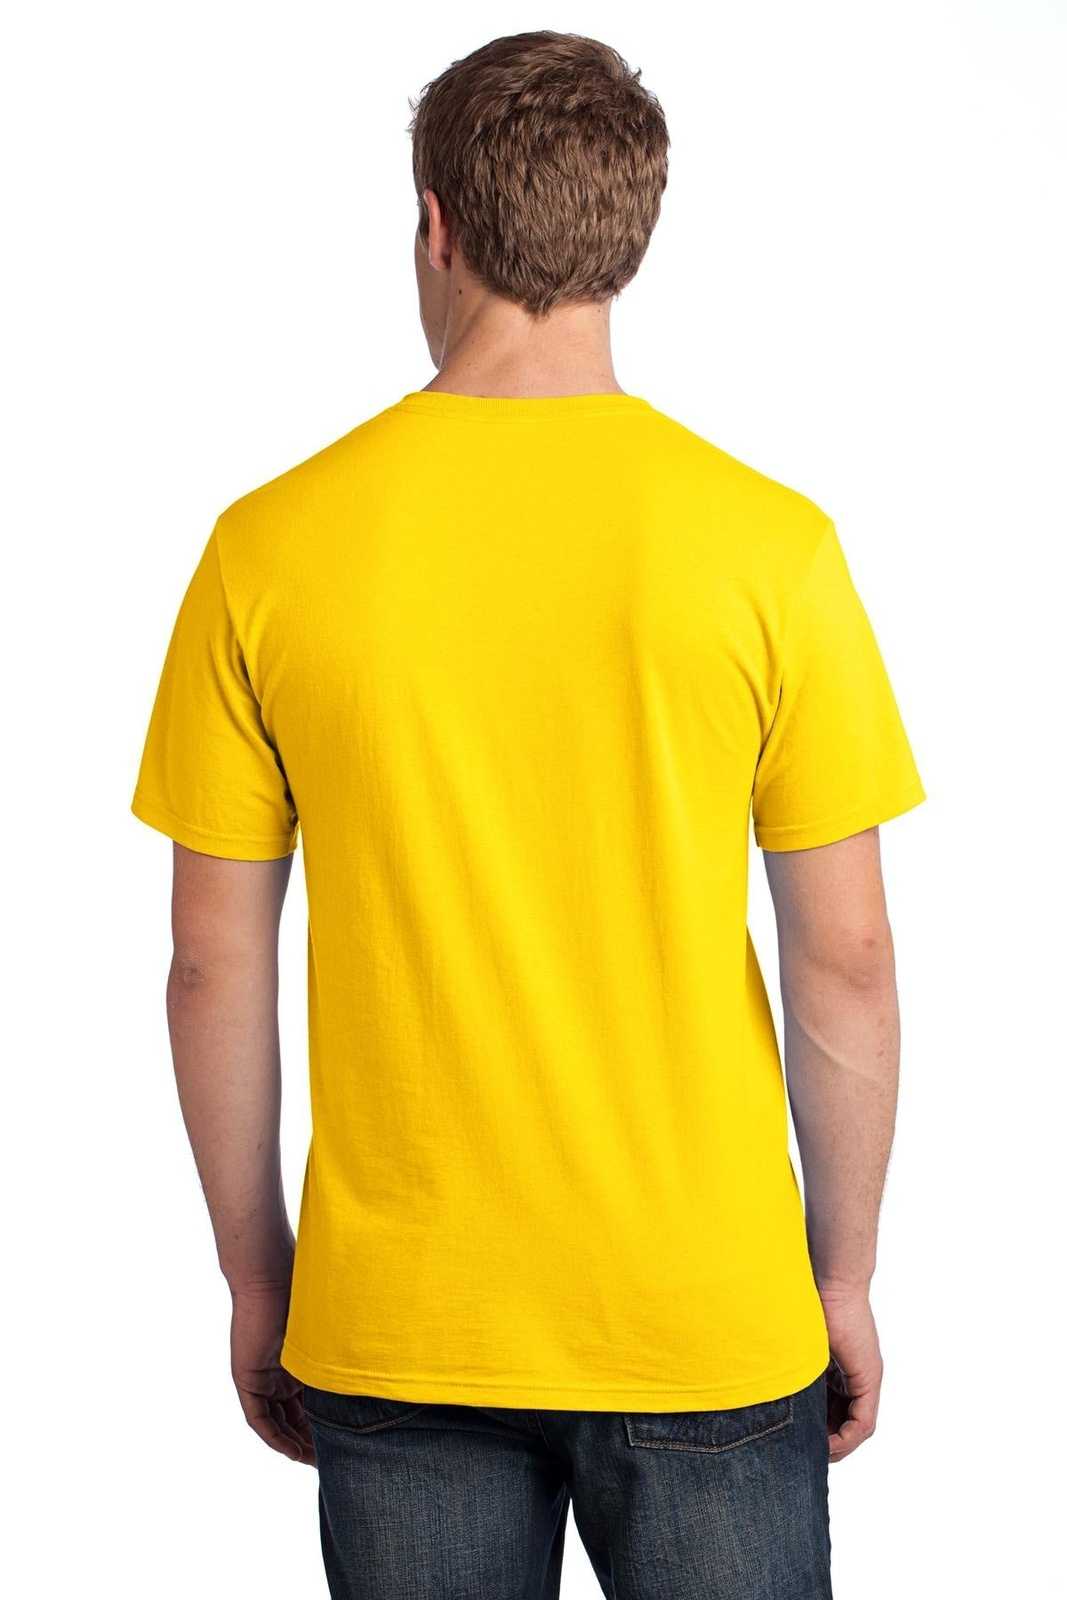 Fruit of the Loom 3930 HD Cotton 100% Cotton T-Shirt - Yellow - HIT a Double